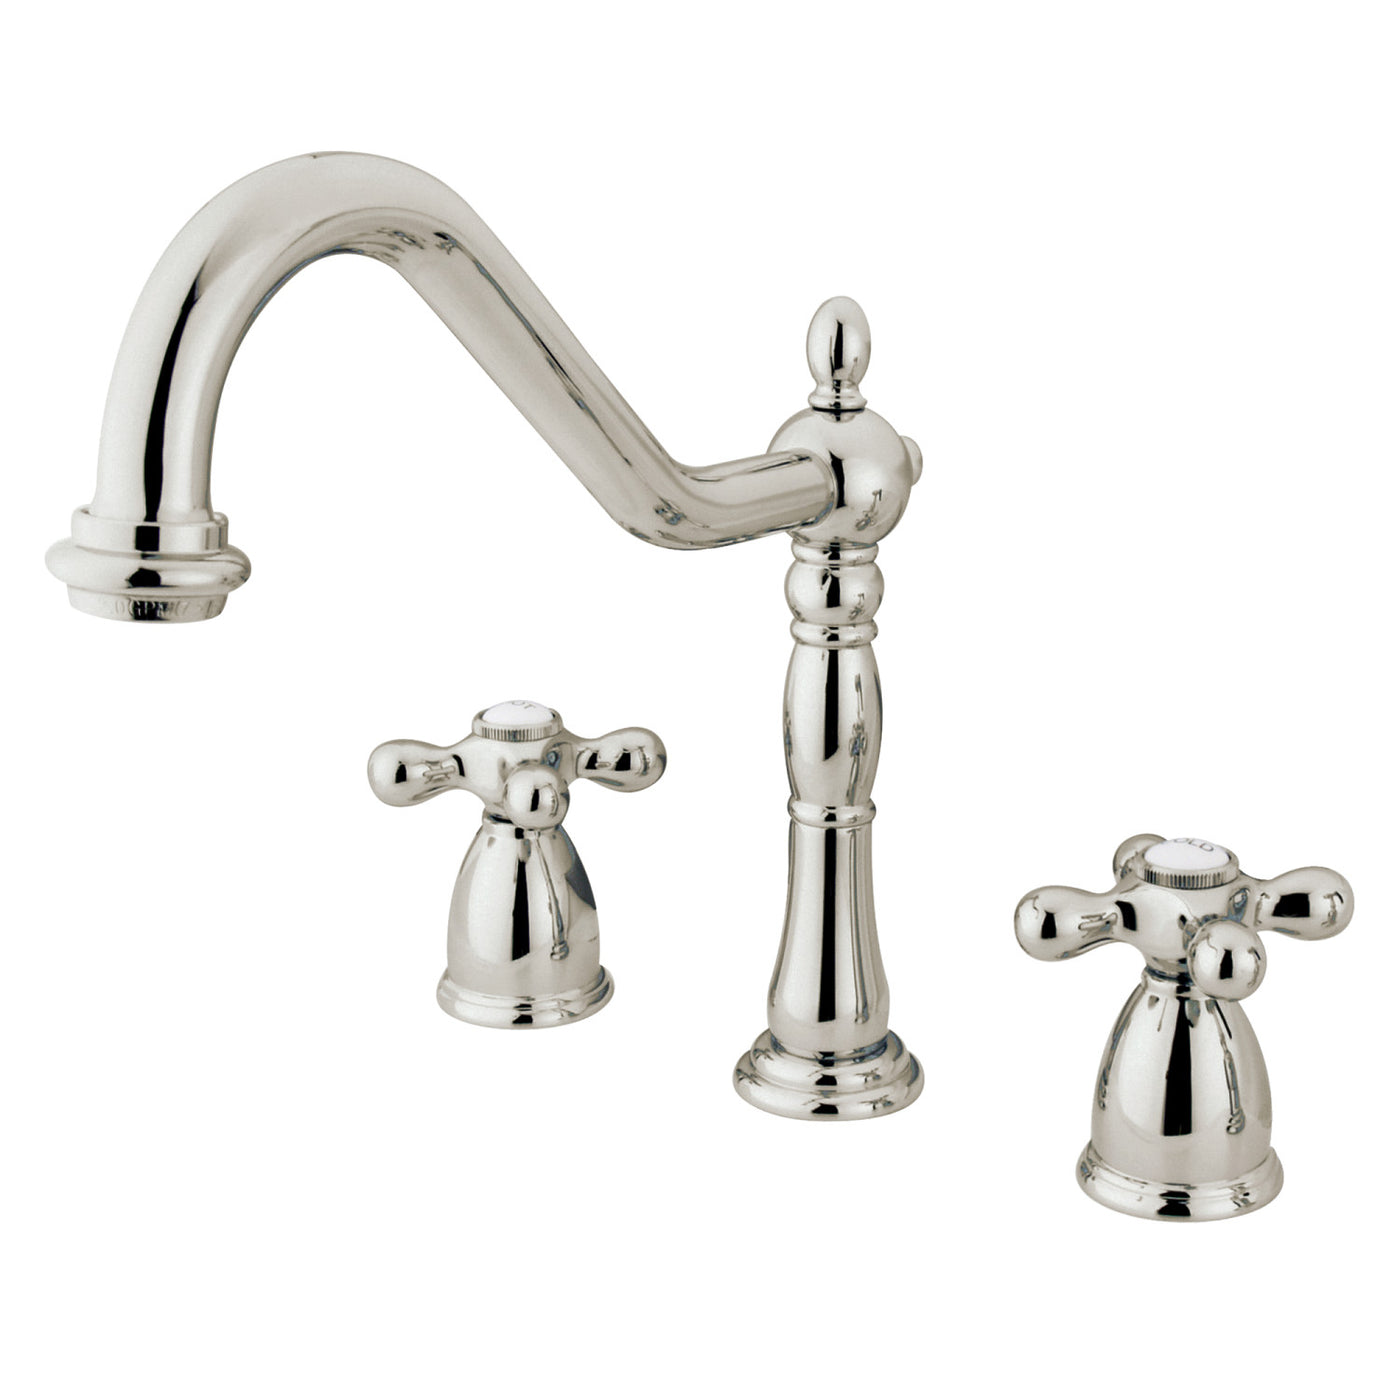 Elements of Design EB1796AXLS Widespread Kitchen Faucet, Polished Nickel